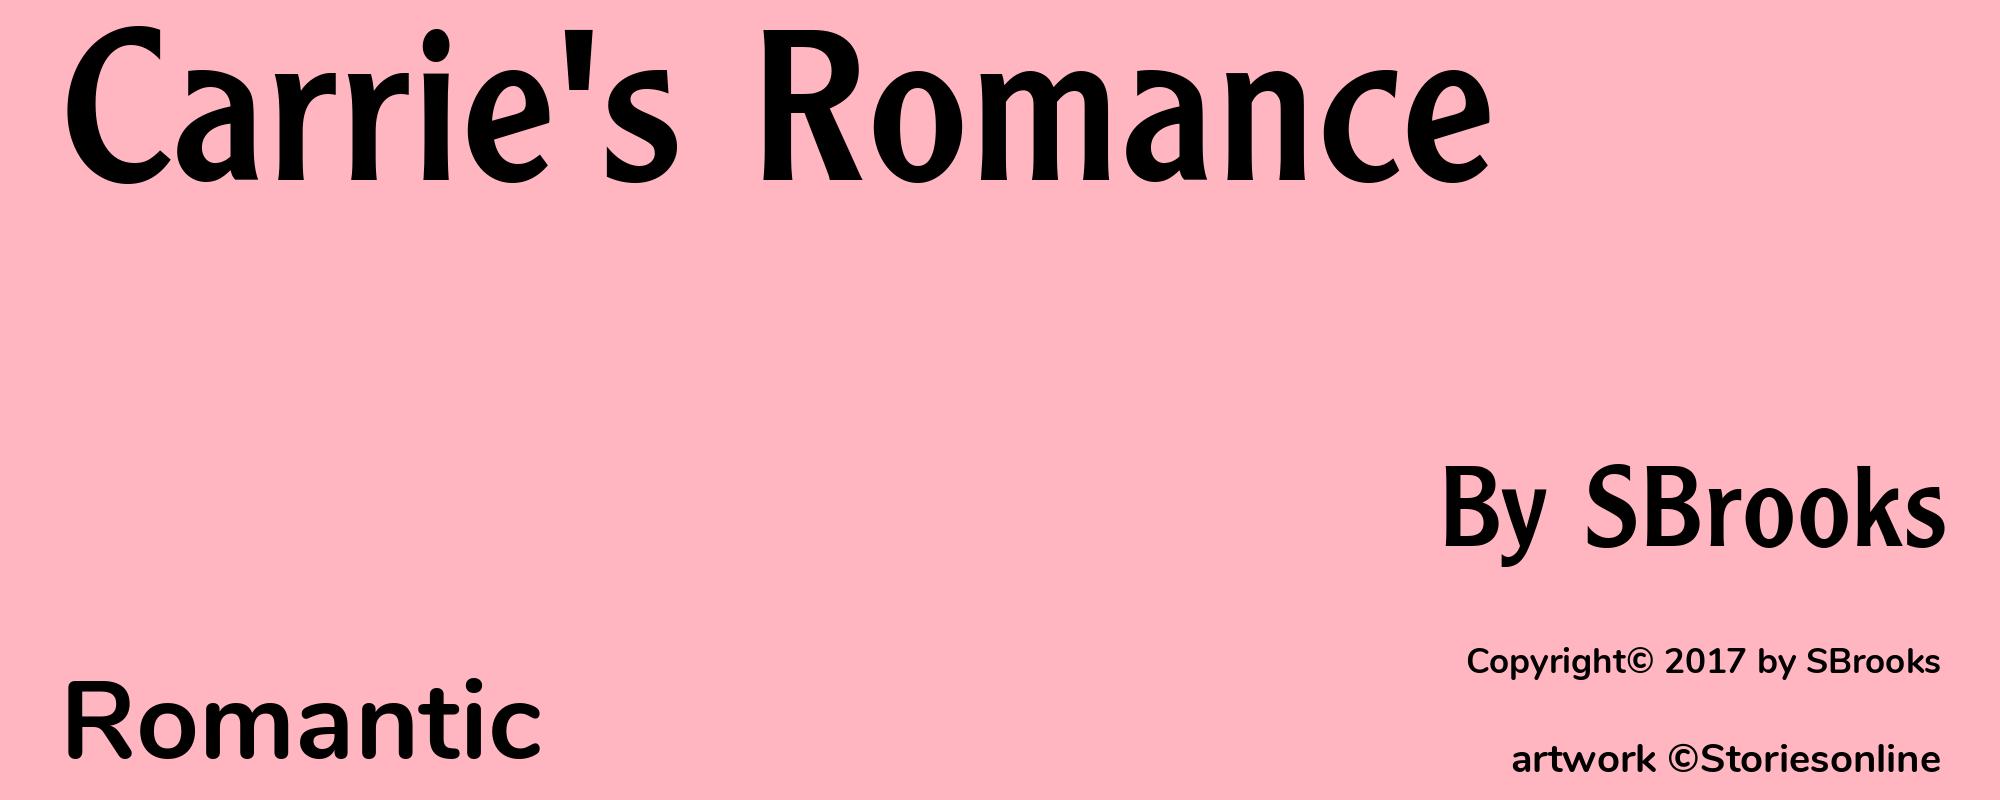 Carrie's Romance - Cover